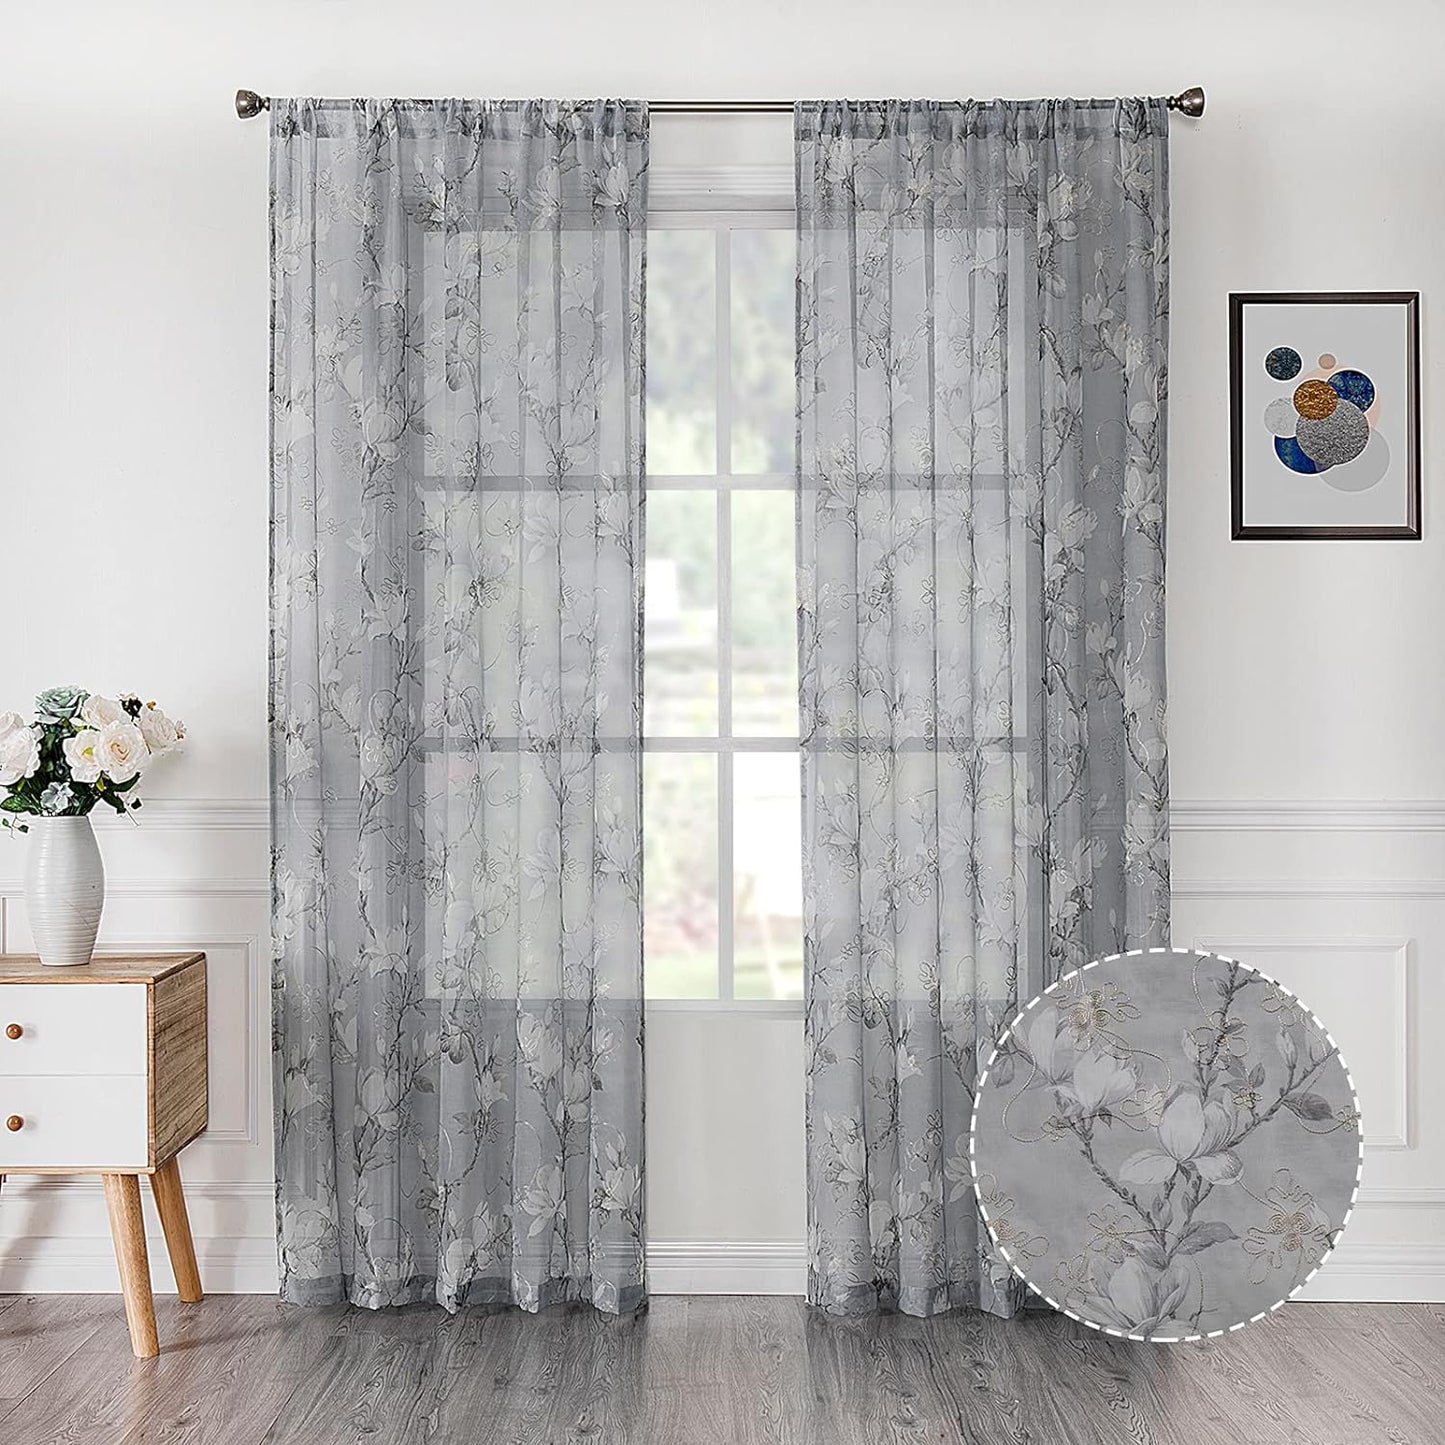 Tollpiz Floral White Sheer Curtain Flower Print Vine Embroidery Bedroom Curtains Rod Pocket Voile Window Curtain for Living Room, 54 X 84 Inches Long, Set of 2 Panels  Tollpiz Tex Grey 54"W X 84"L 